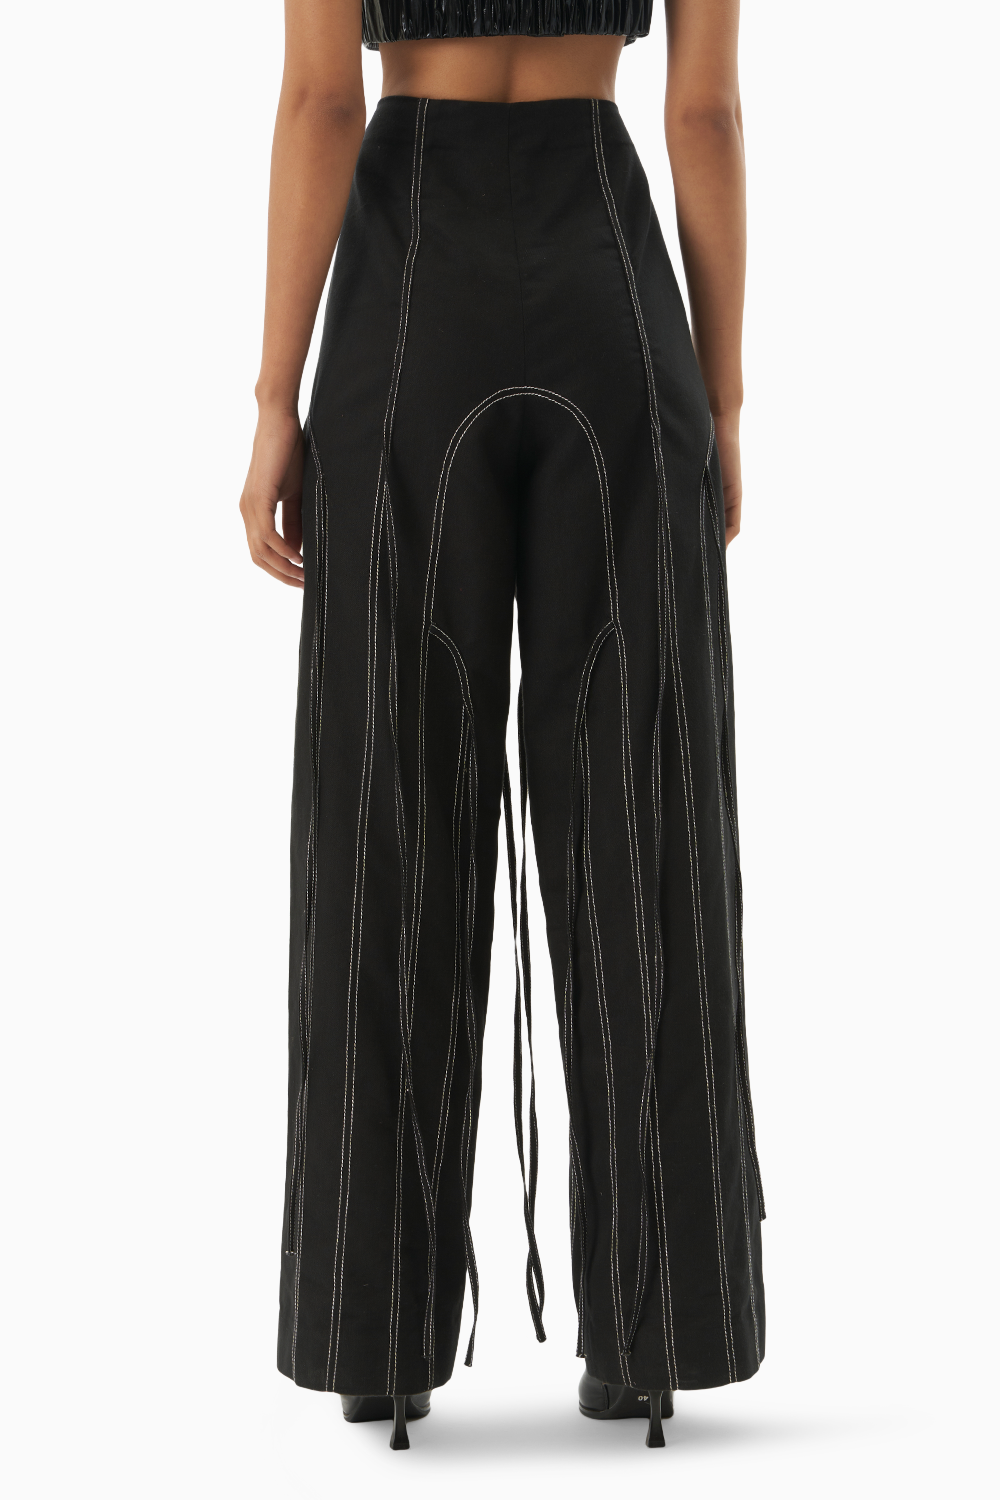 Black Ruched Foil Top and Denim Panelled Trouser